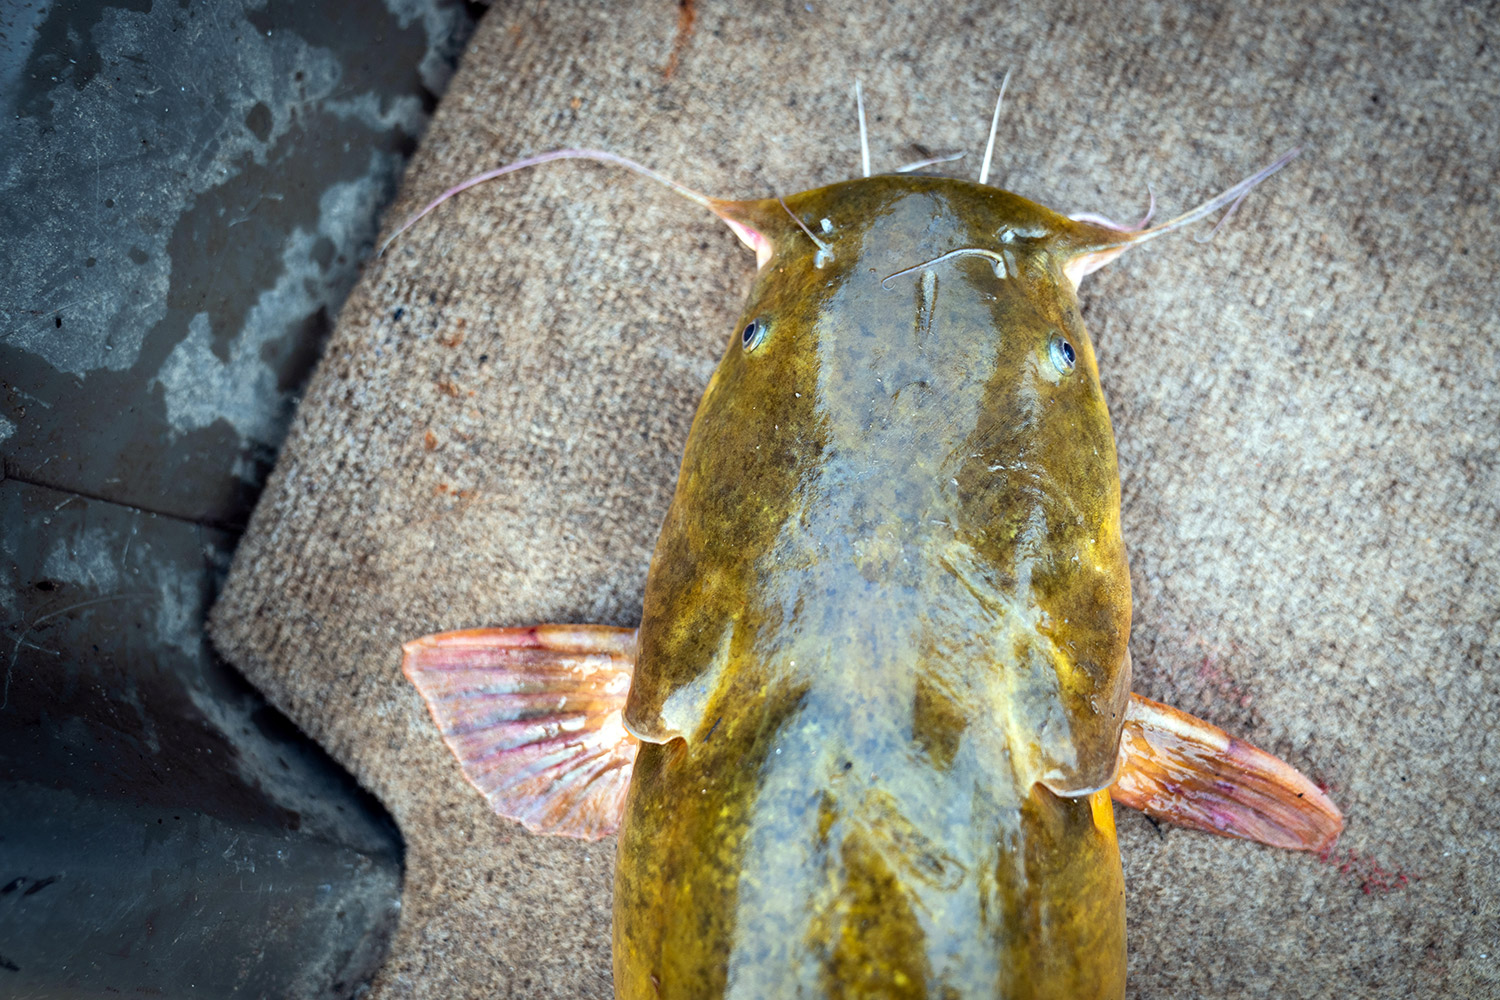 yellow catfish on carpeted boat deck